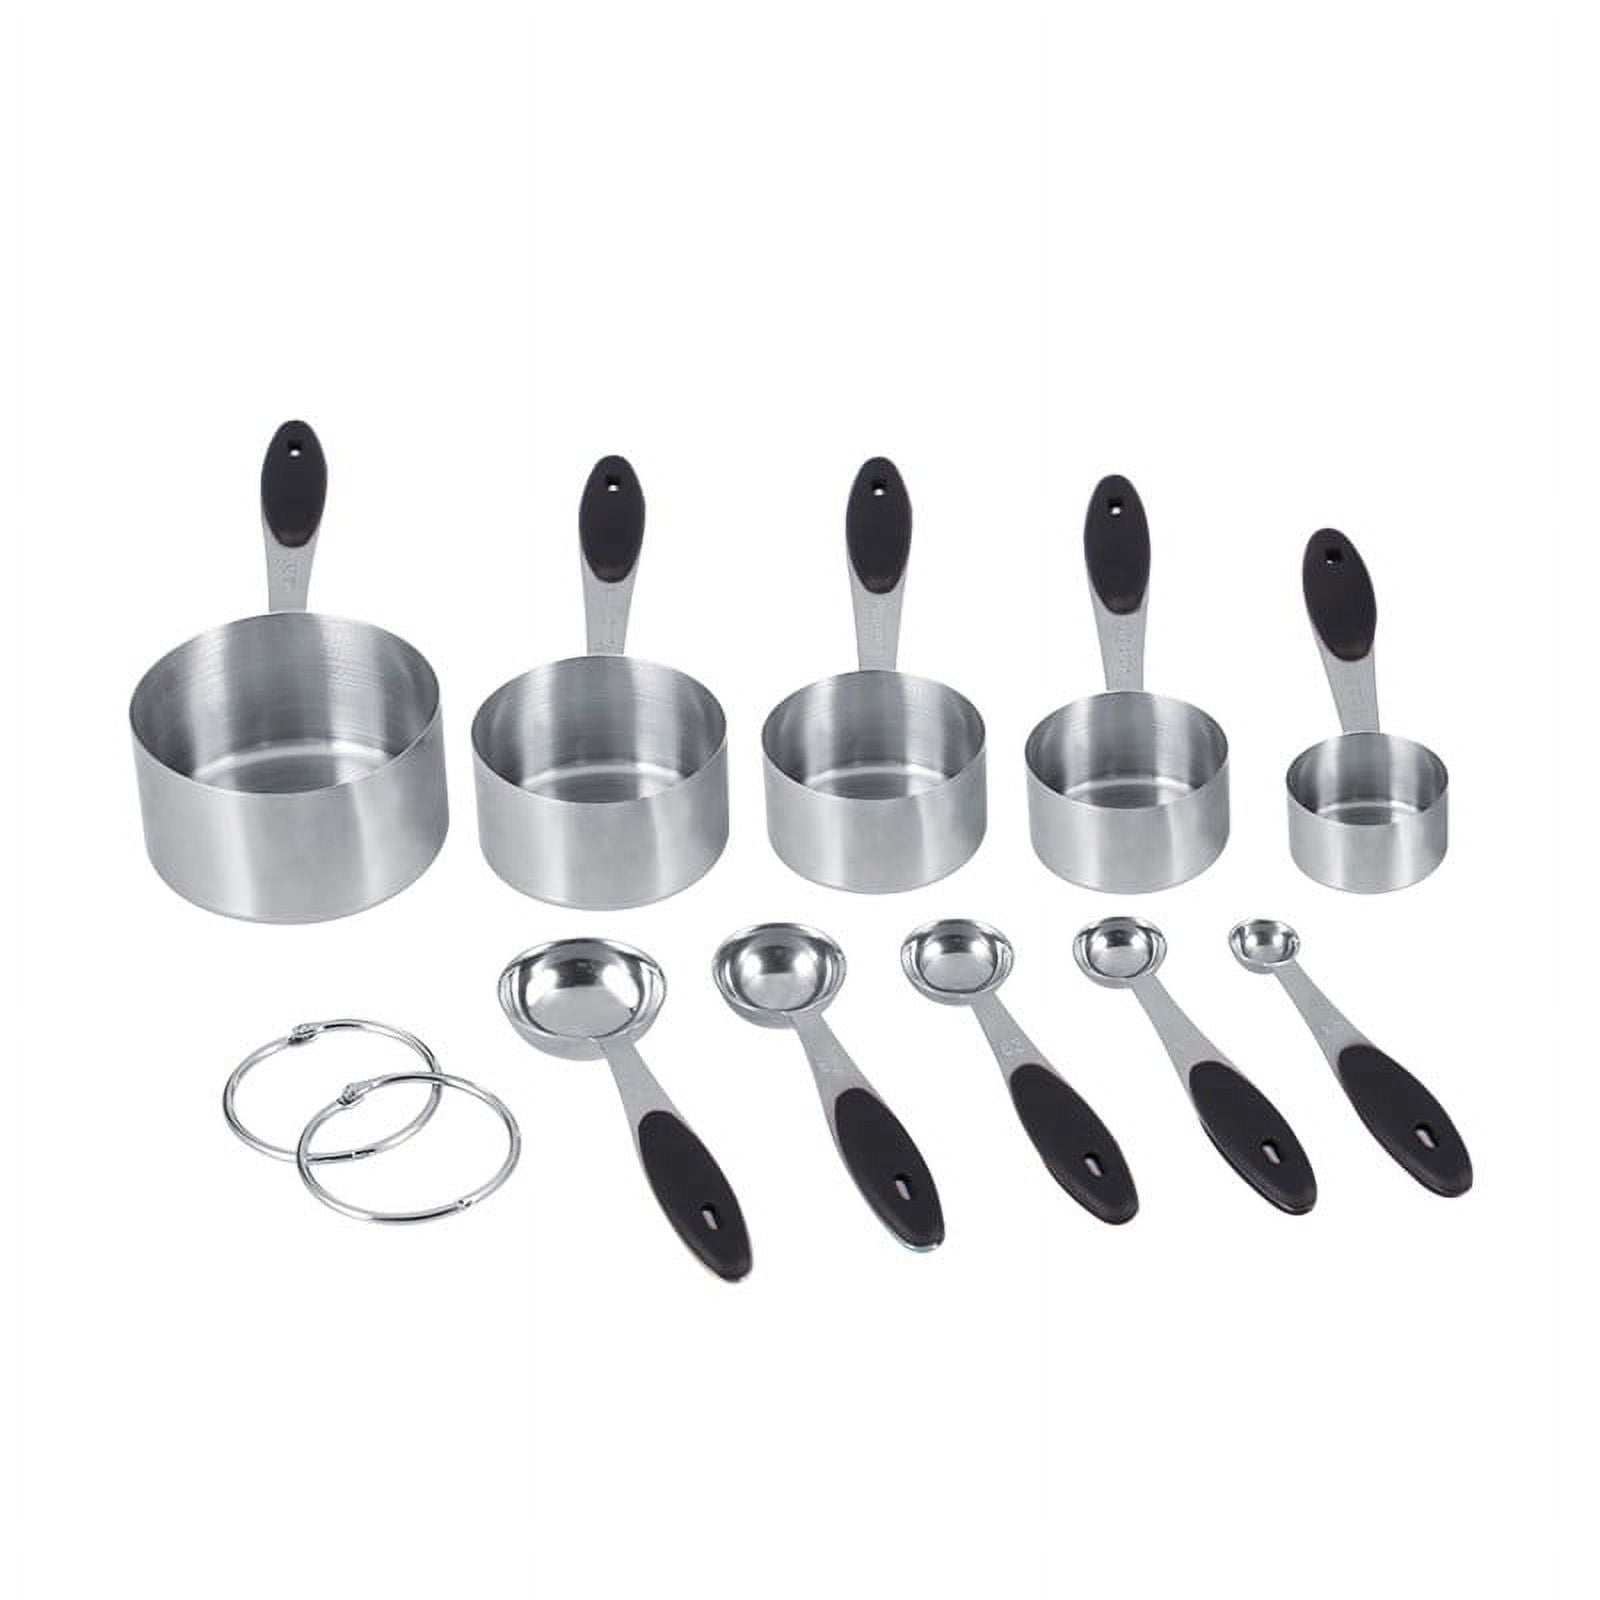 Gerich 10 Pieces Measuring-cup and Spoon Set in Black with Scale